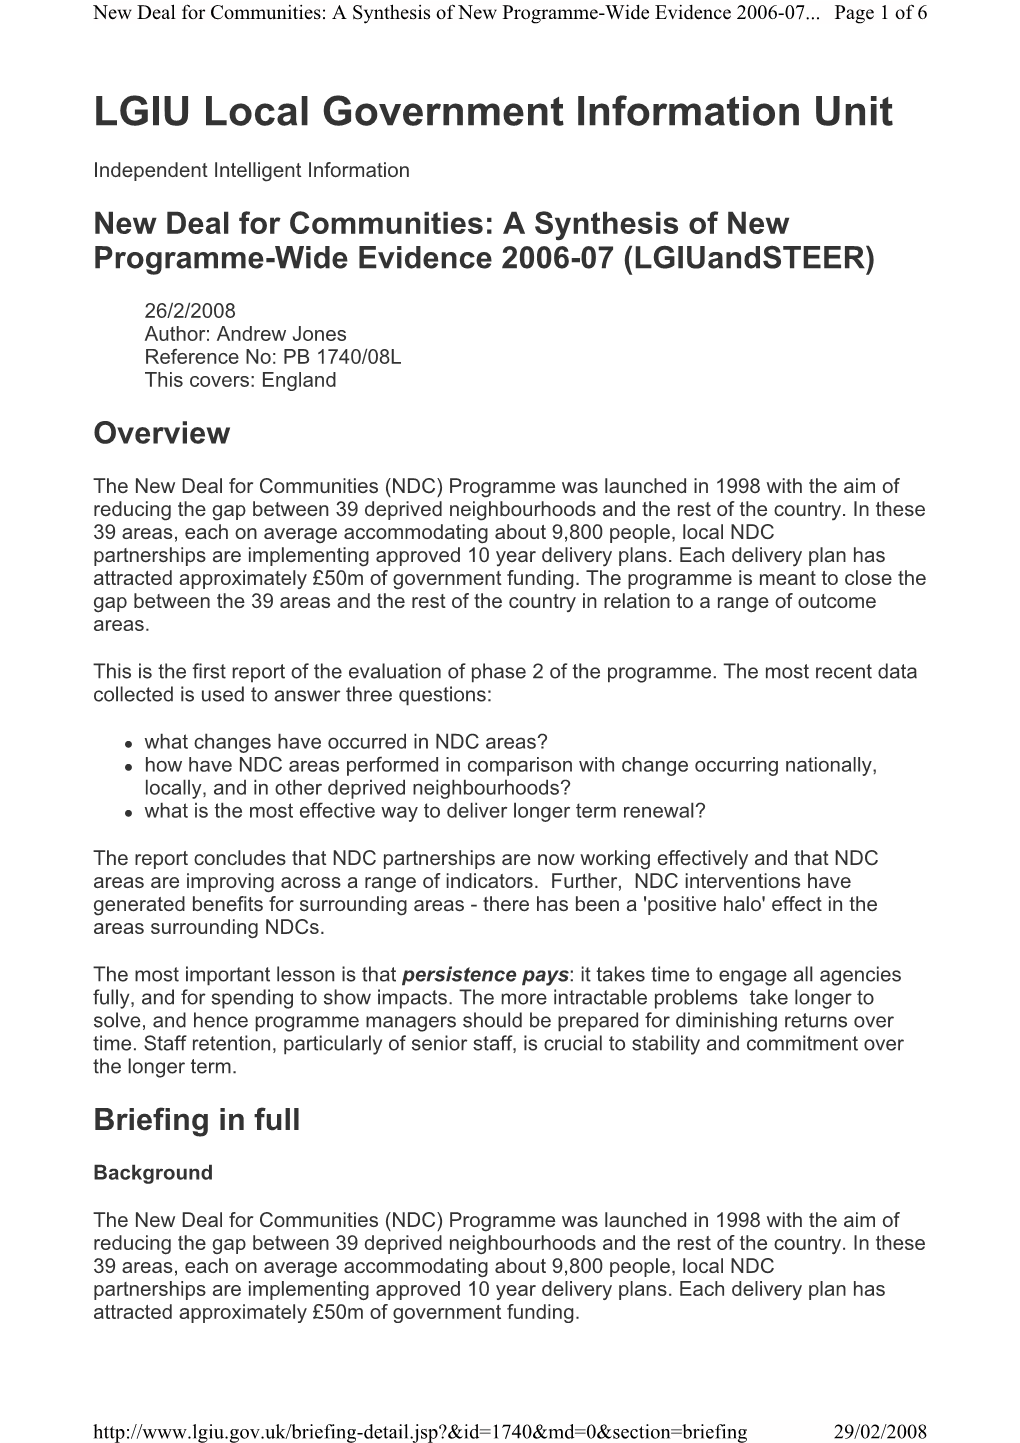 New Deal for Communities: a Synthesis of New Programme-Wide Evidence 2006-07